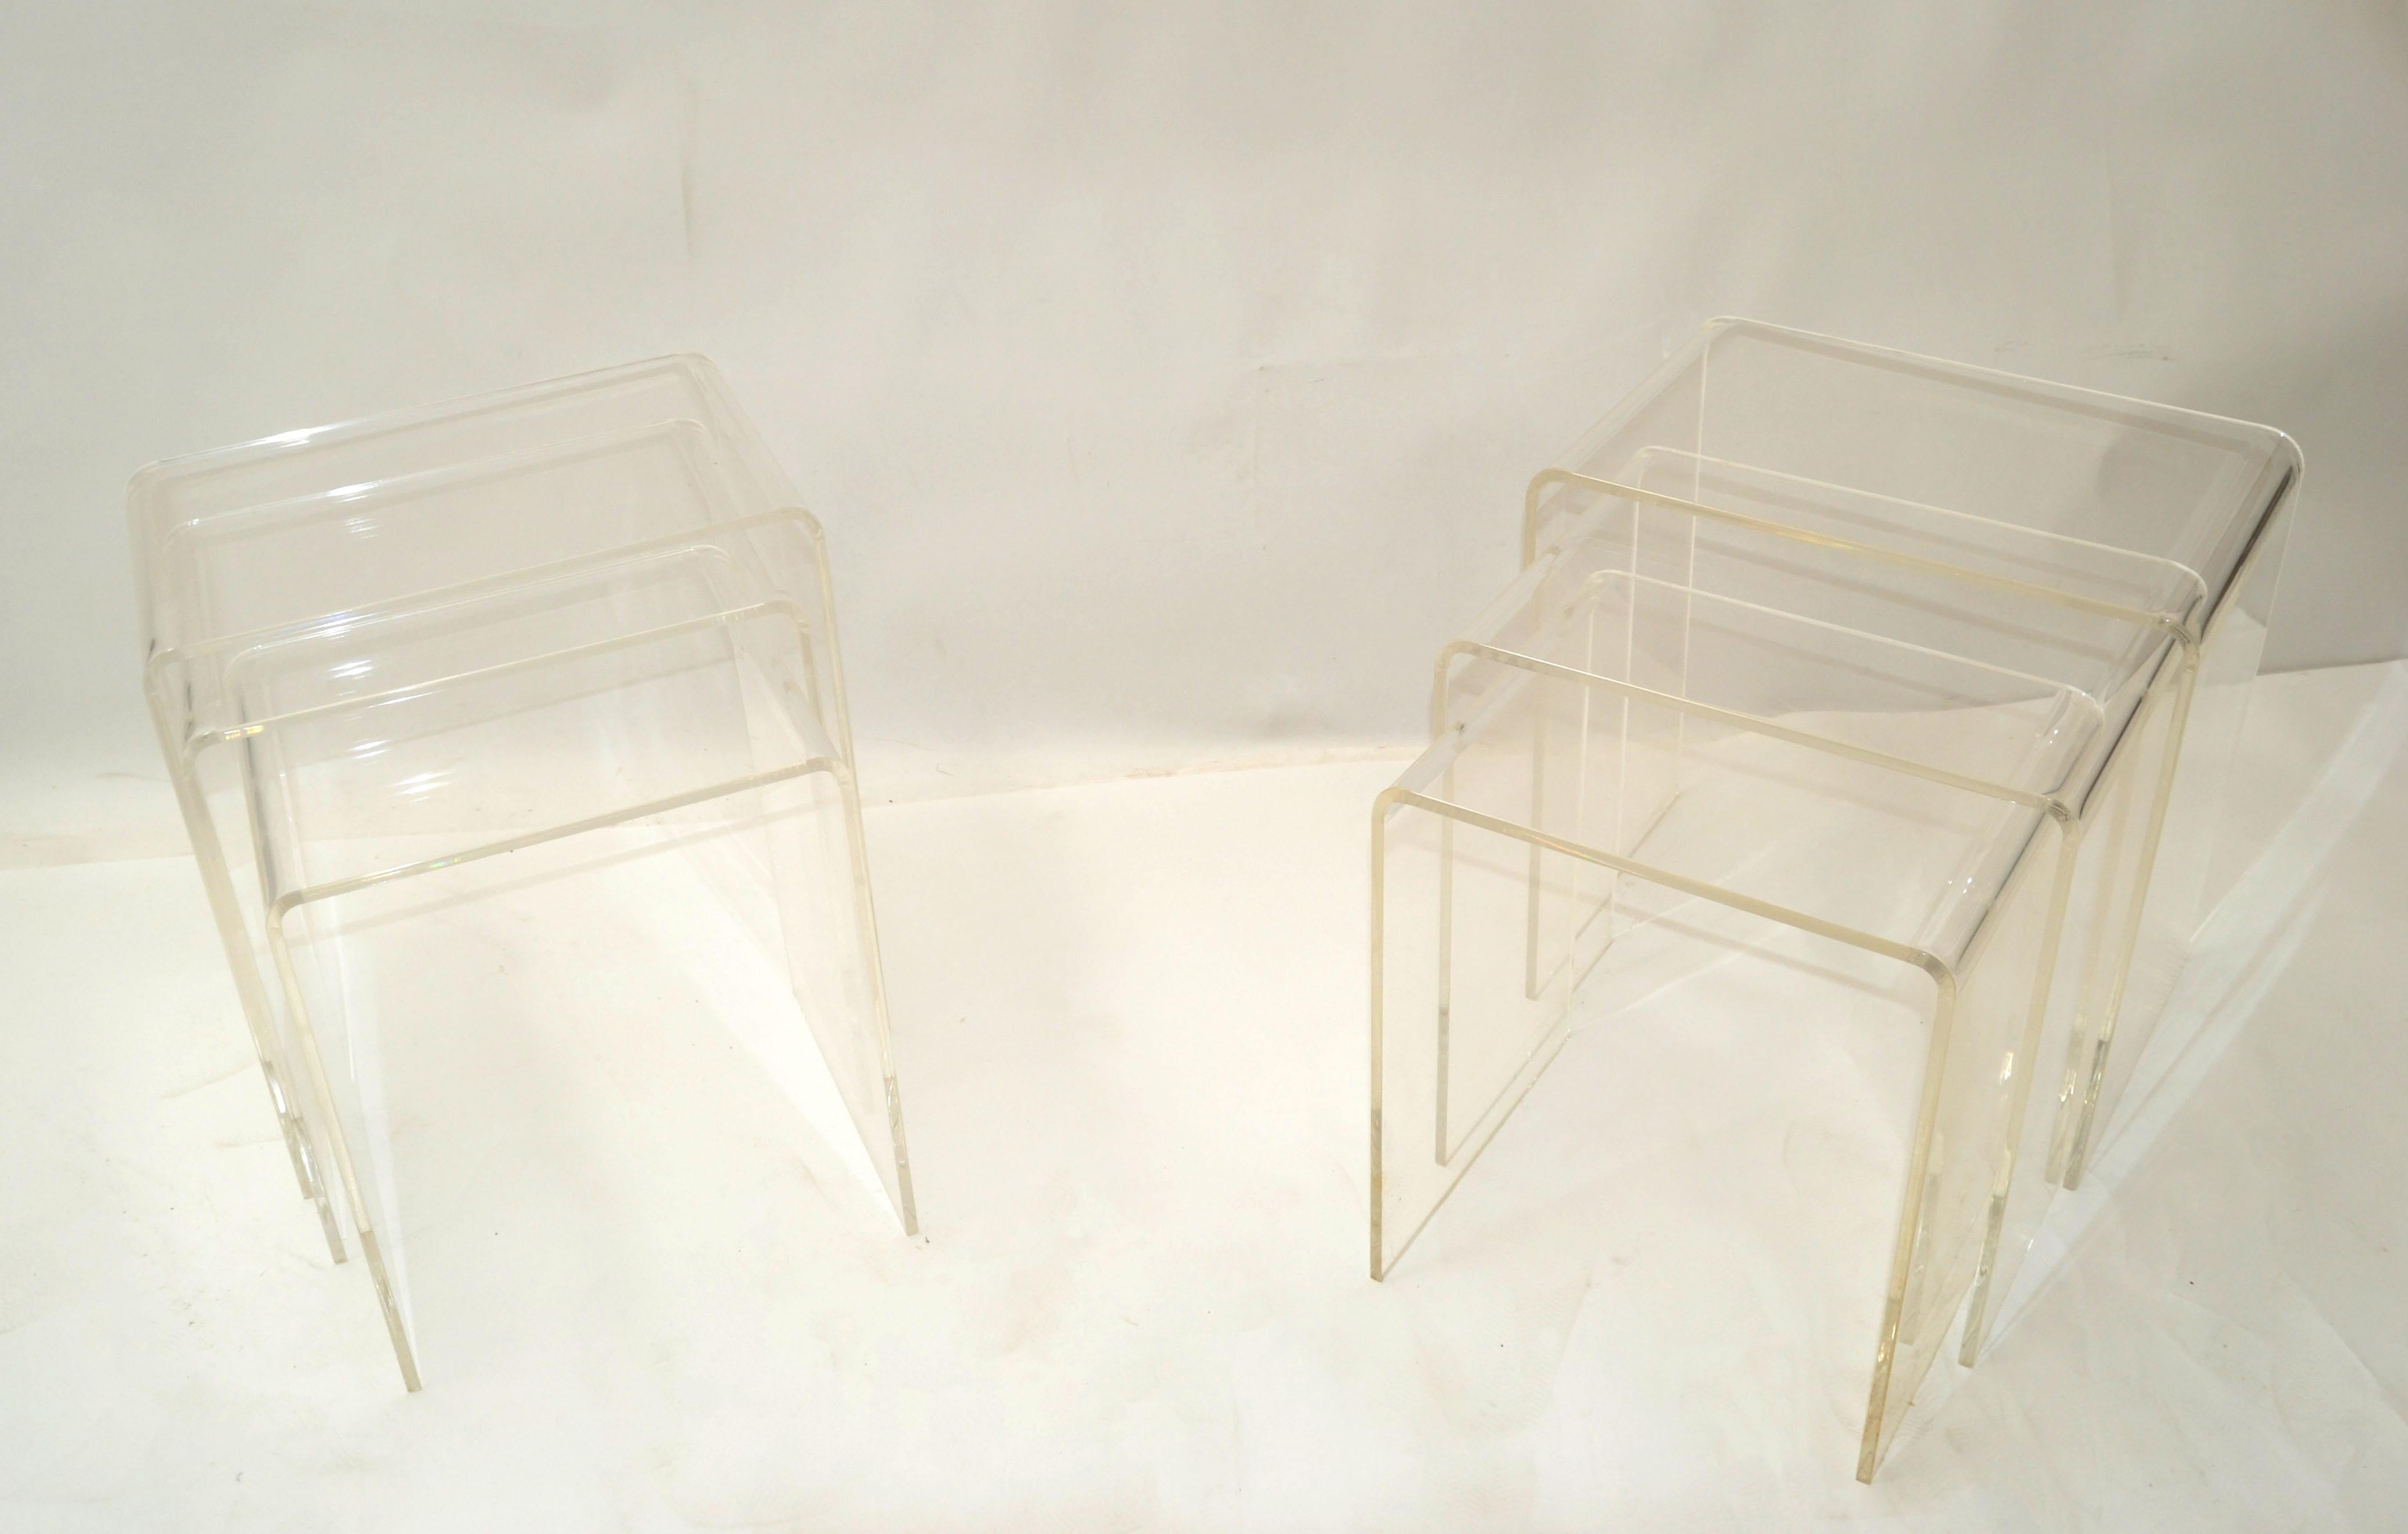 Pair of Lucite Waterfall Nesting Tables / Stacking Tables, Stools, Set of 3 6